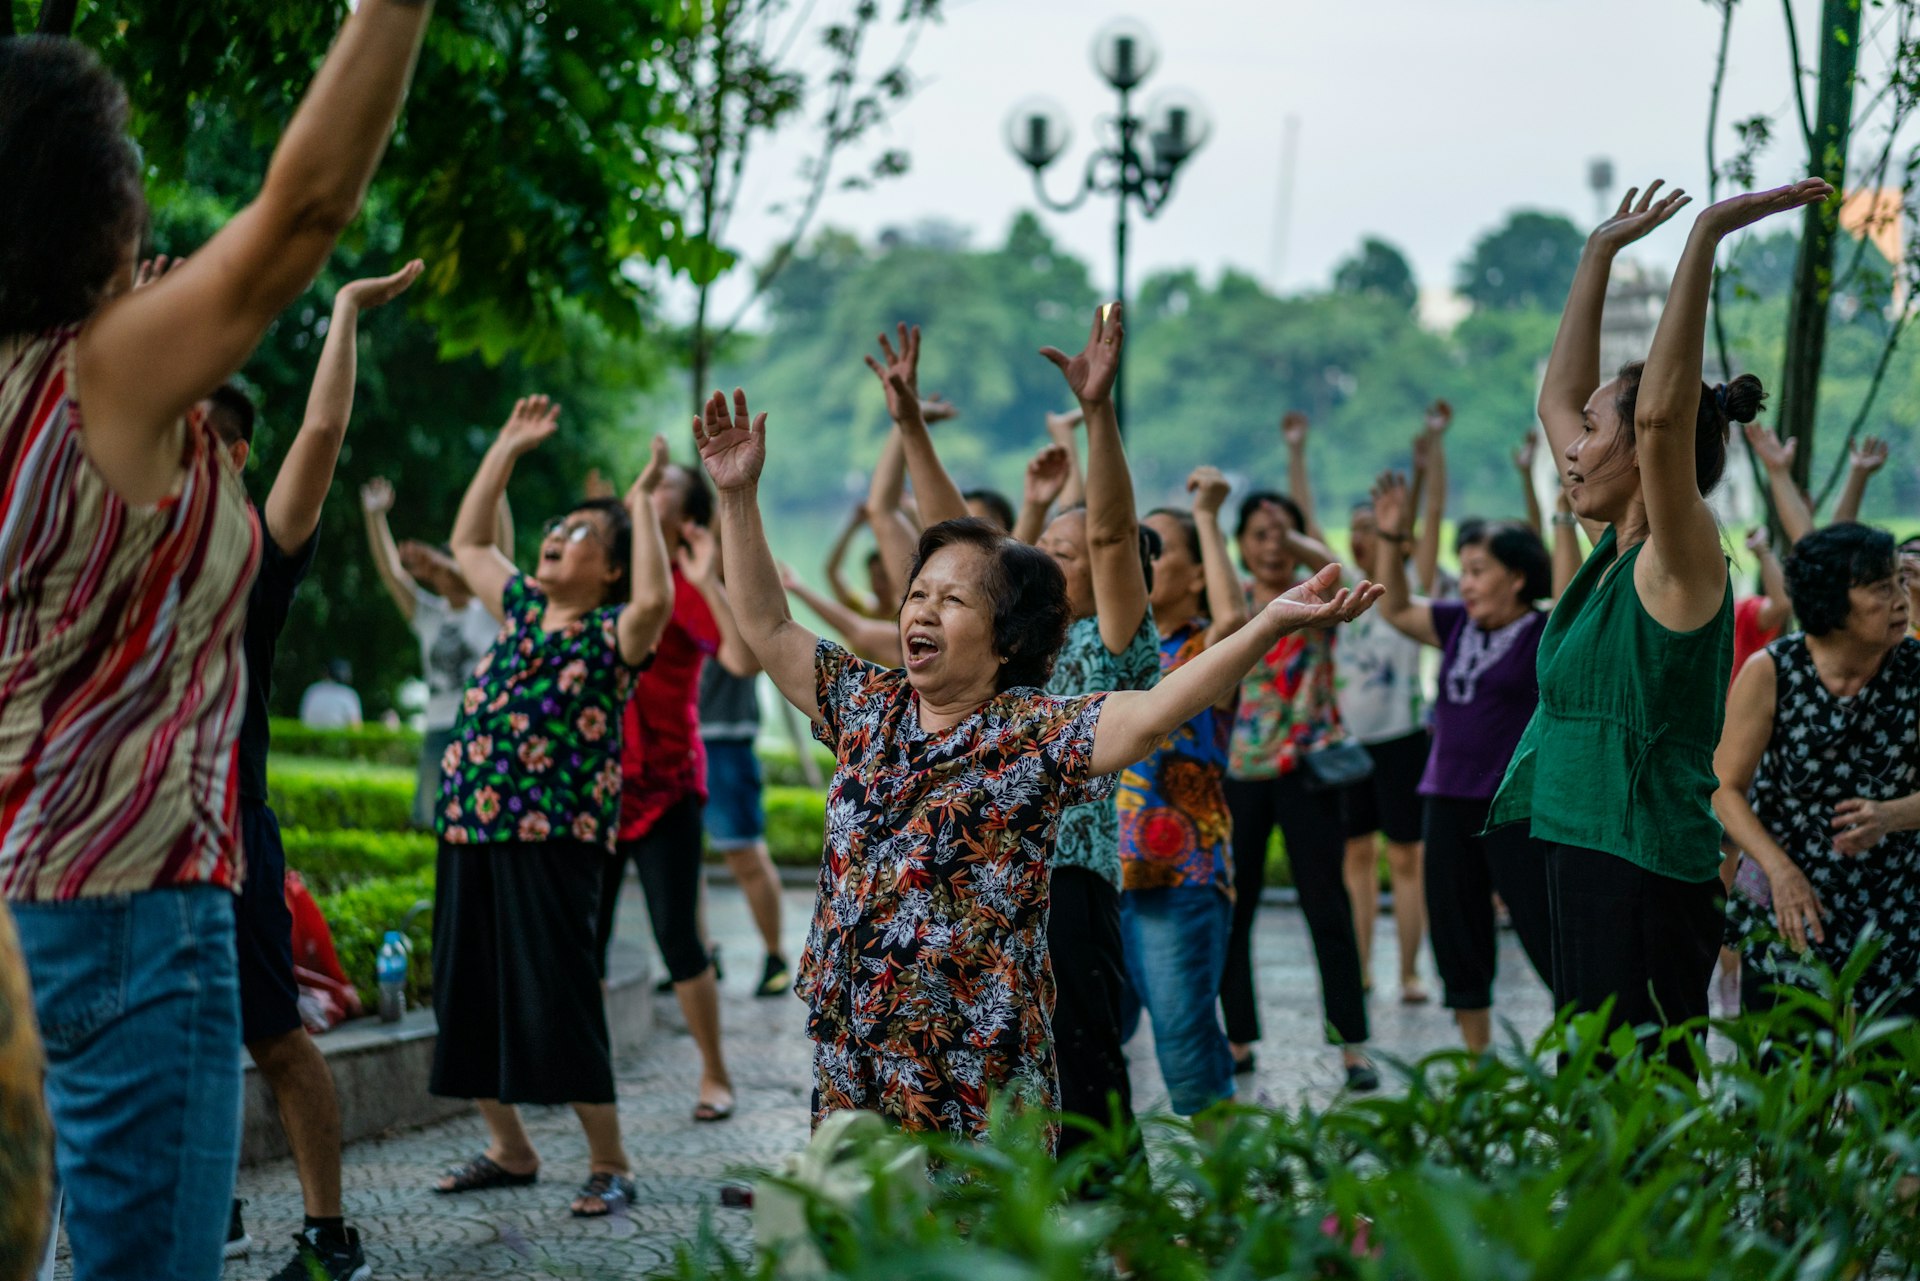 A group of people exercising together at a park in Hanoi.